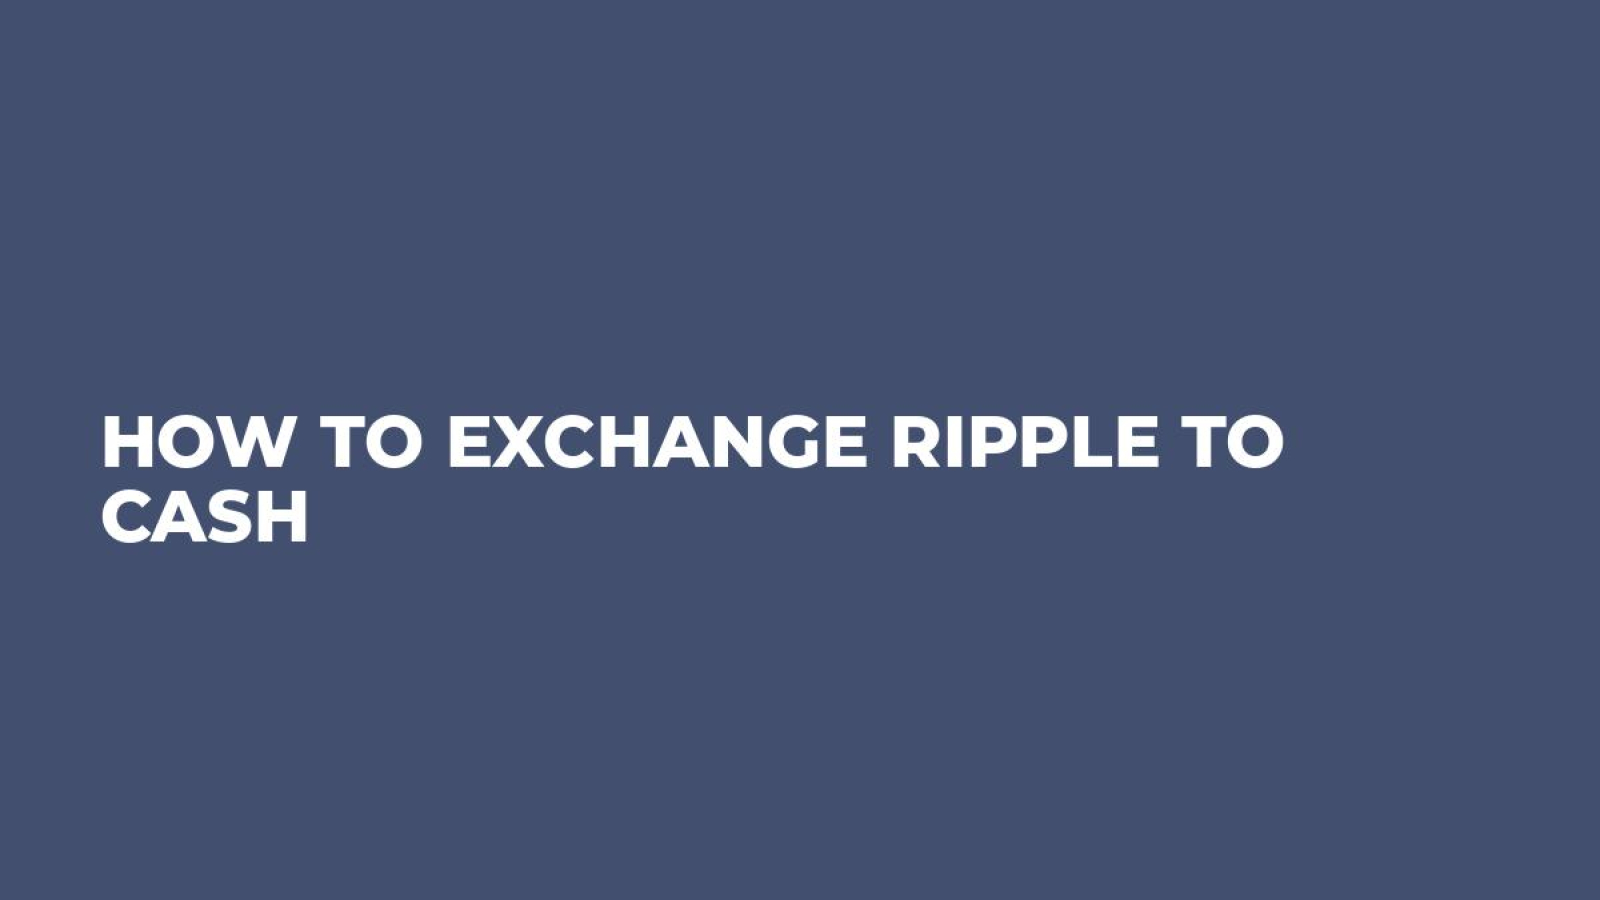 How to Exchange Ripple to Cash